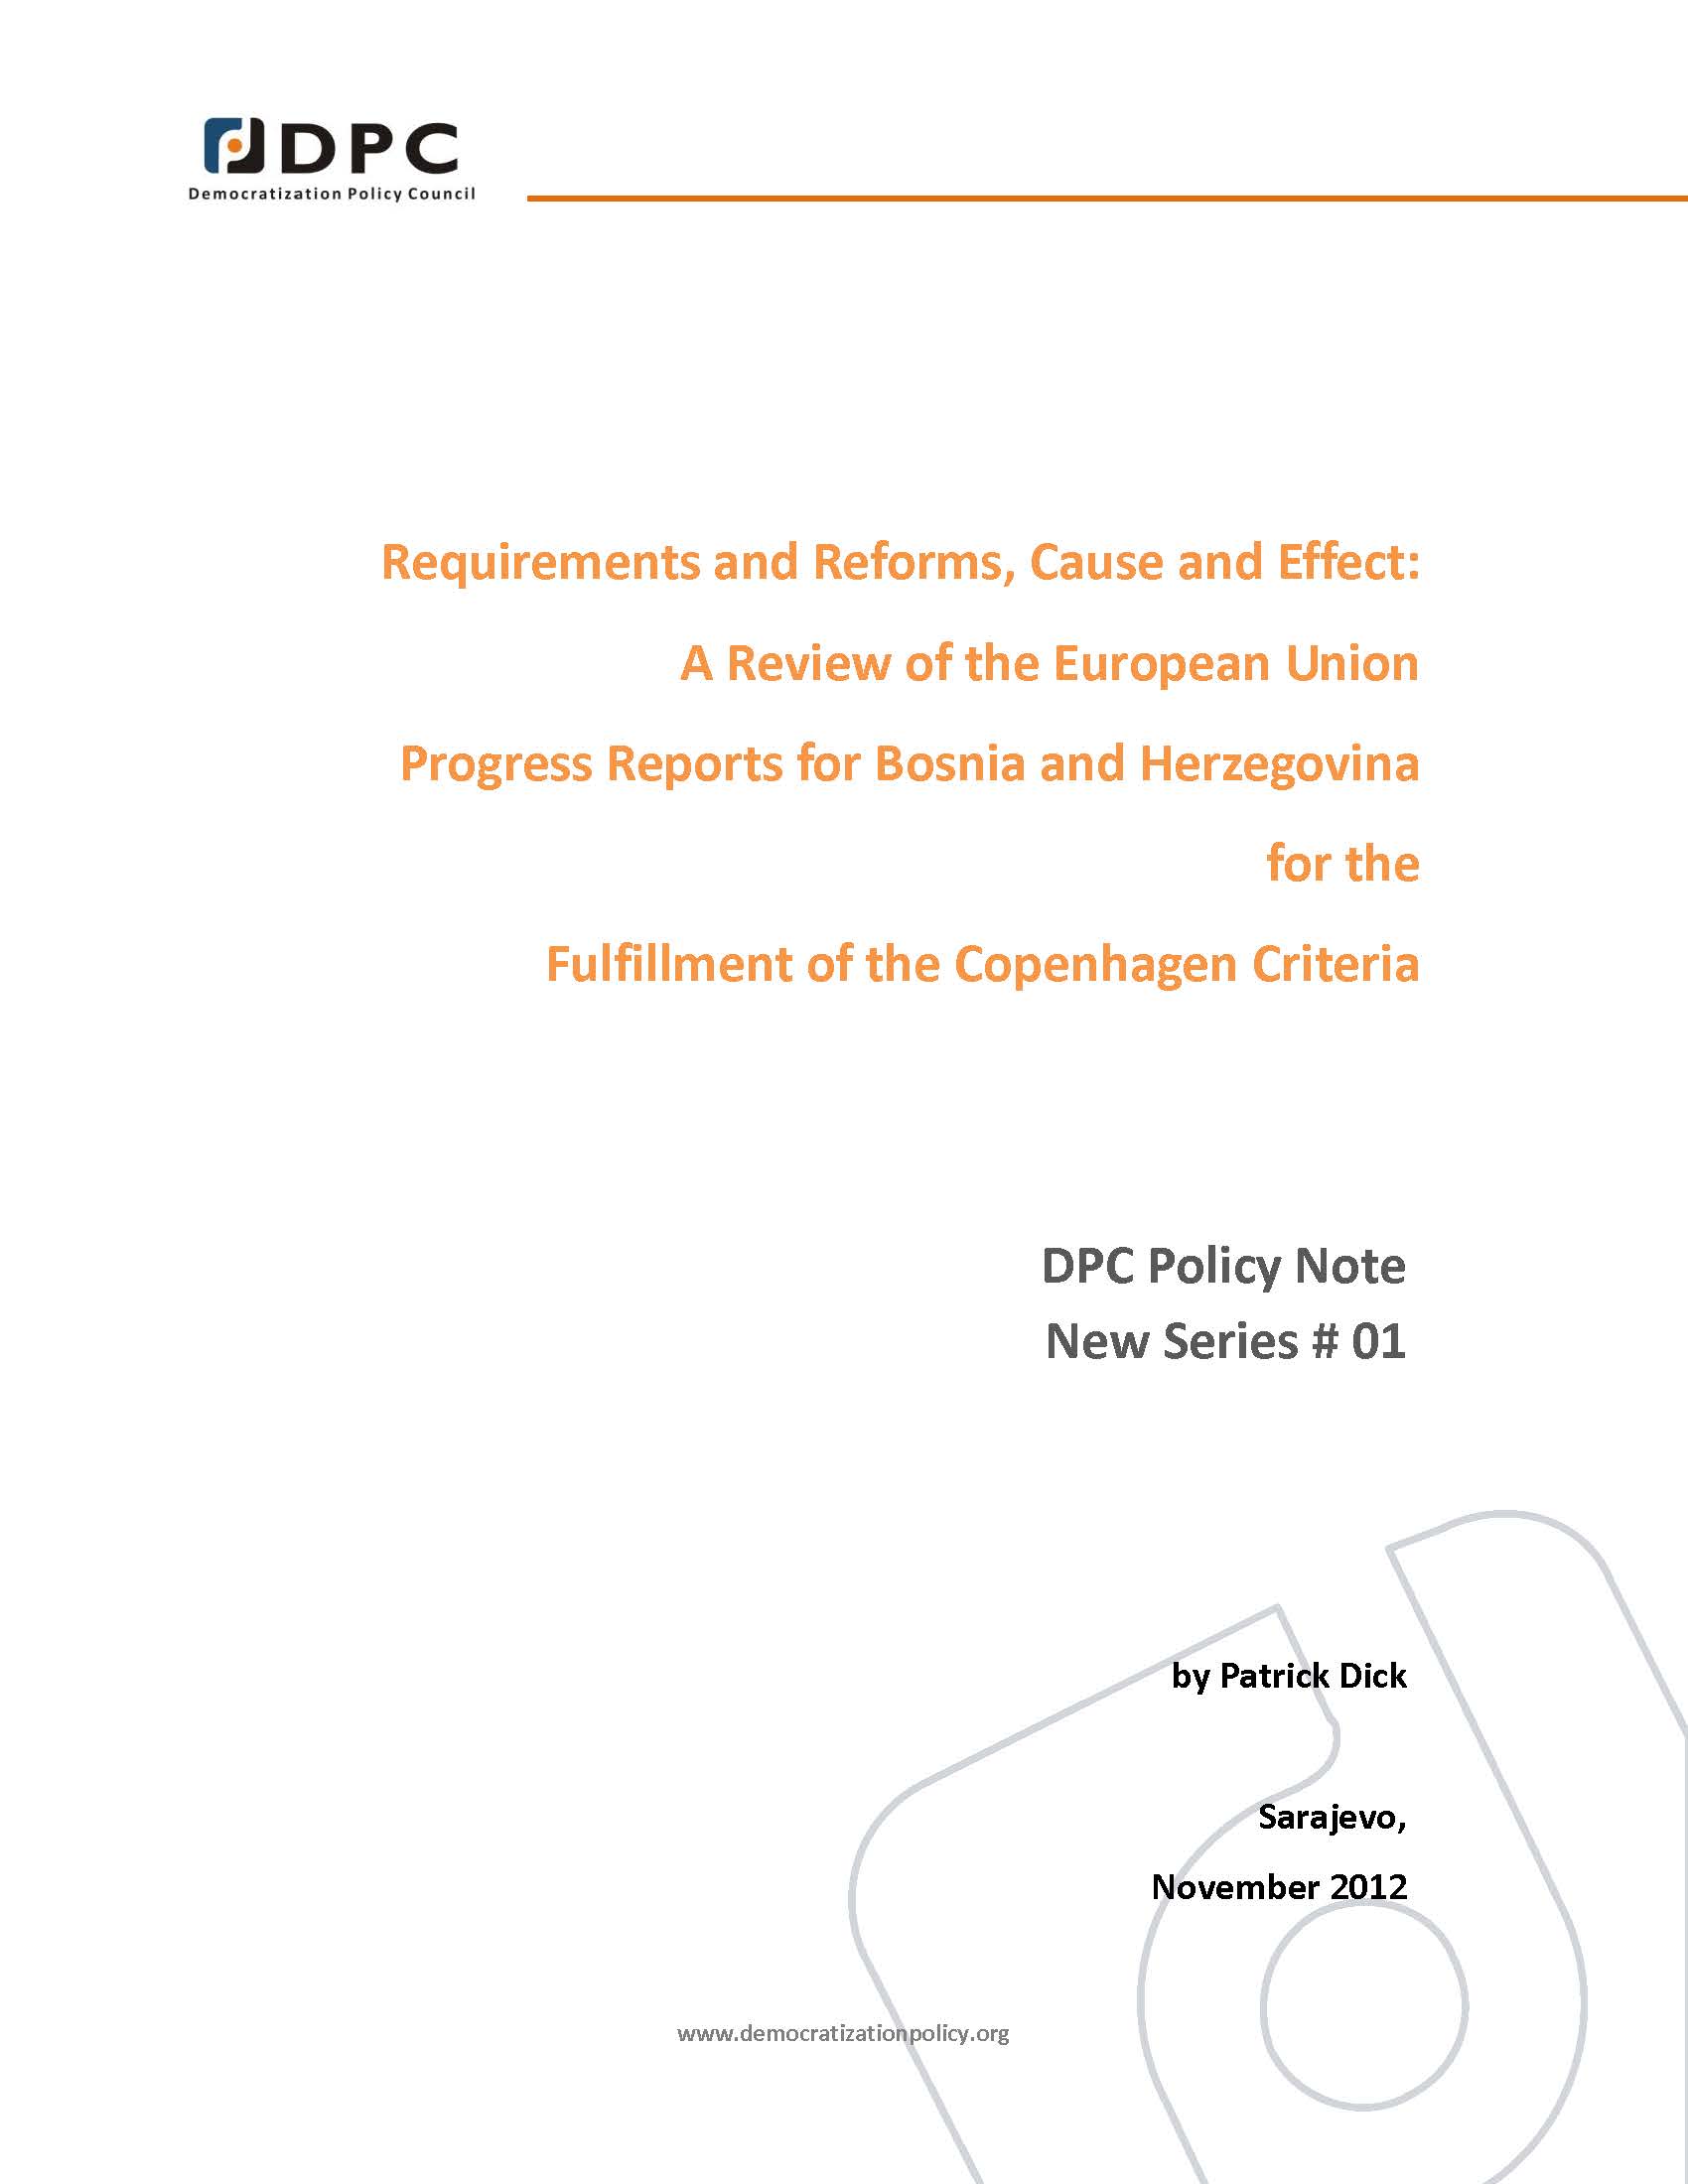 DPC POLICY NOTE 01: Requirements and Reforms, Cause and Effect: A Review of the European Union Progress Reports for Bosnia and Herzegovina for the Fulfillment of the Copenhagen Criteria. Cover Image